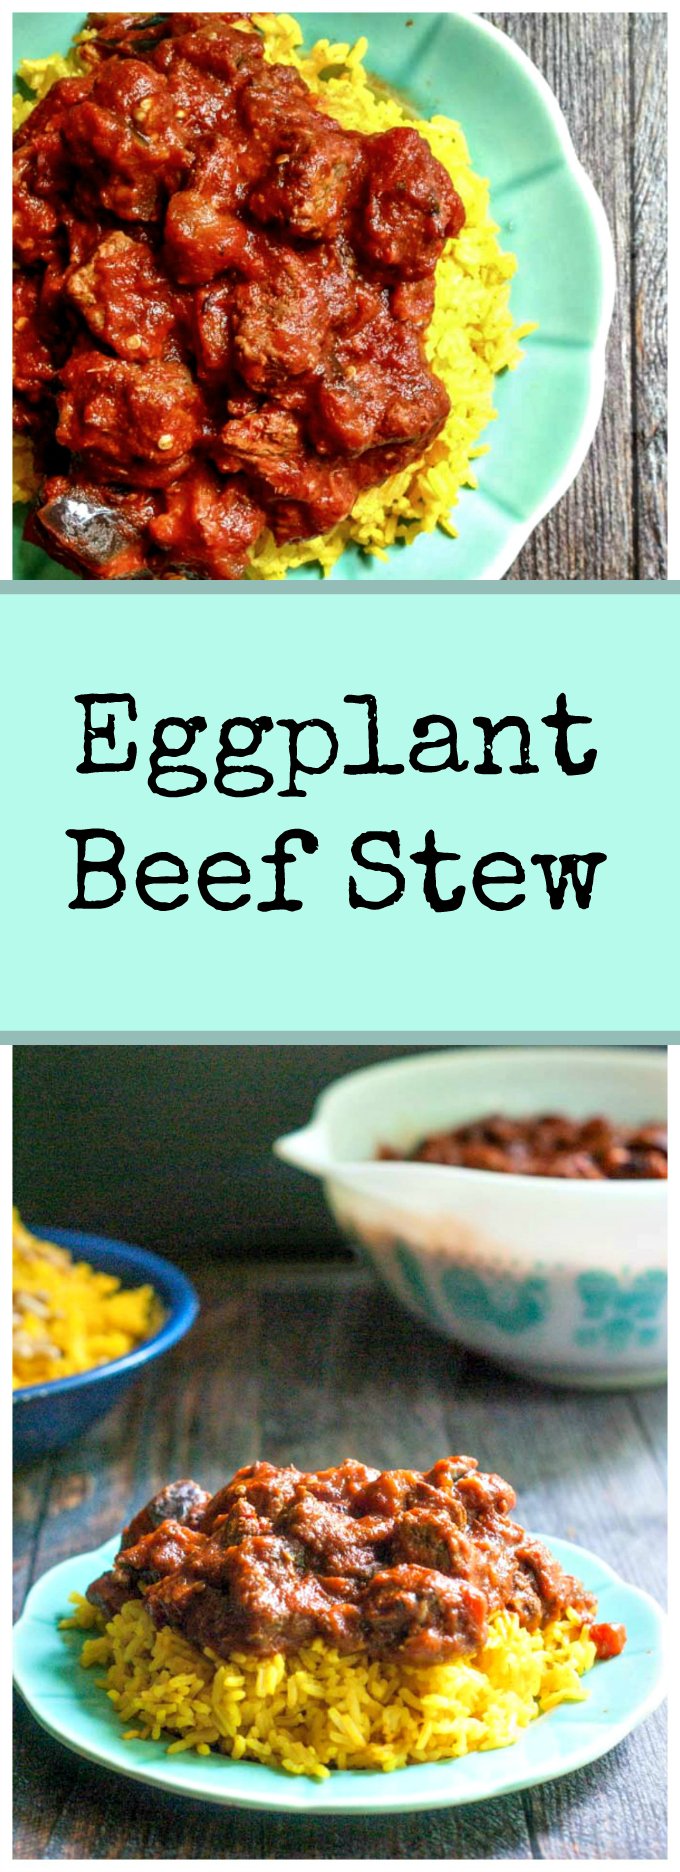 This eggplant beef stew is an easy Middle Eastern dish that you can make in an Instant Pot, slow cooker or on the stove. Tangy, sweet tomatoes with silky eggplant and cinnamon spiced meat make for a delicious dish any night of the week. #SundaySupper